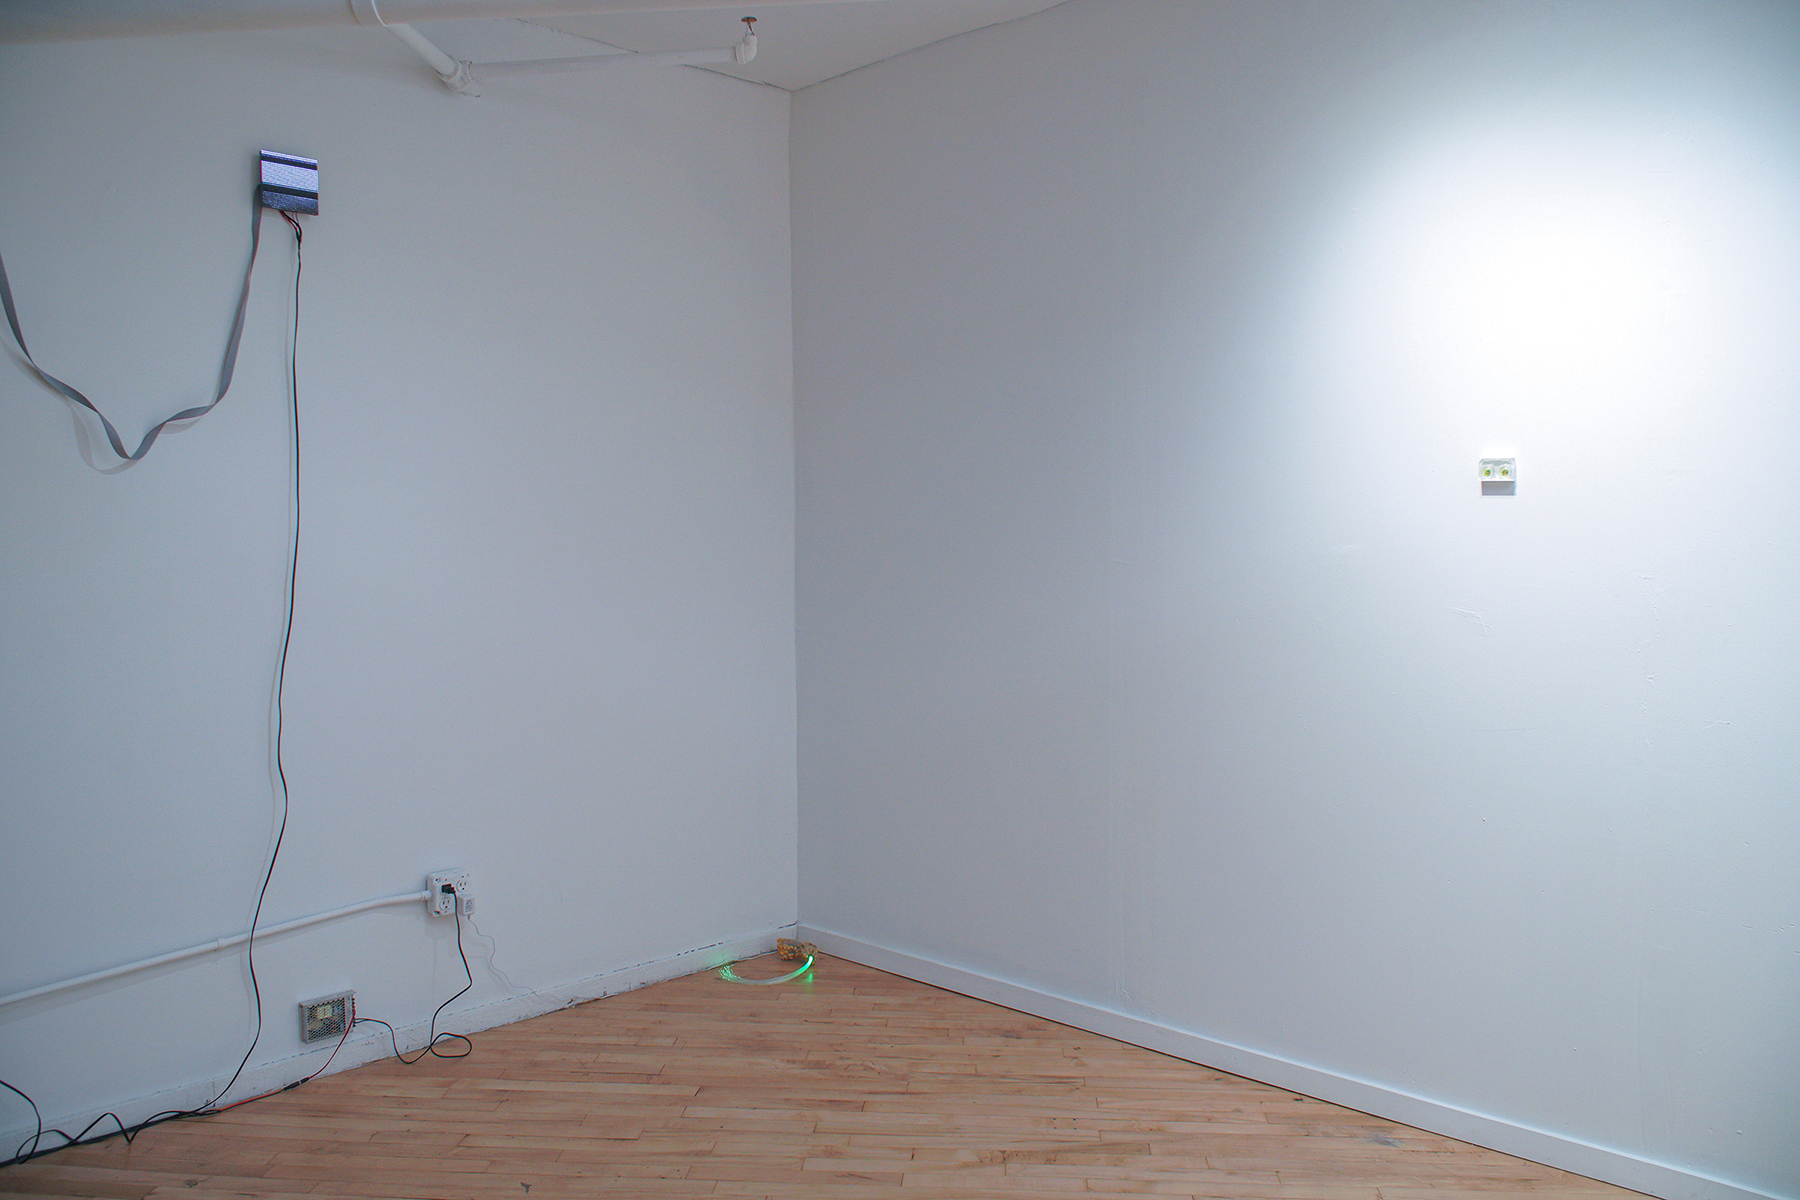 WHO IS PLUTO - Installation view, Subtitled NYC, 2022